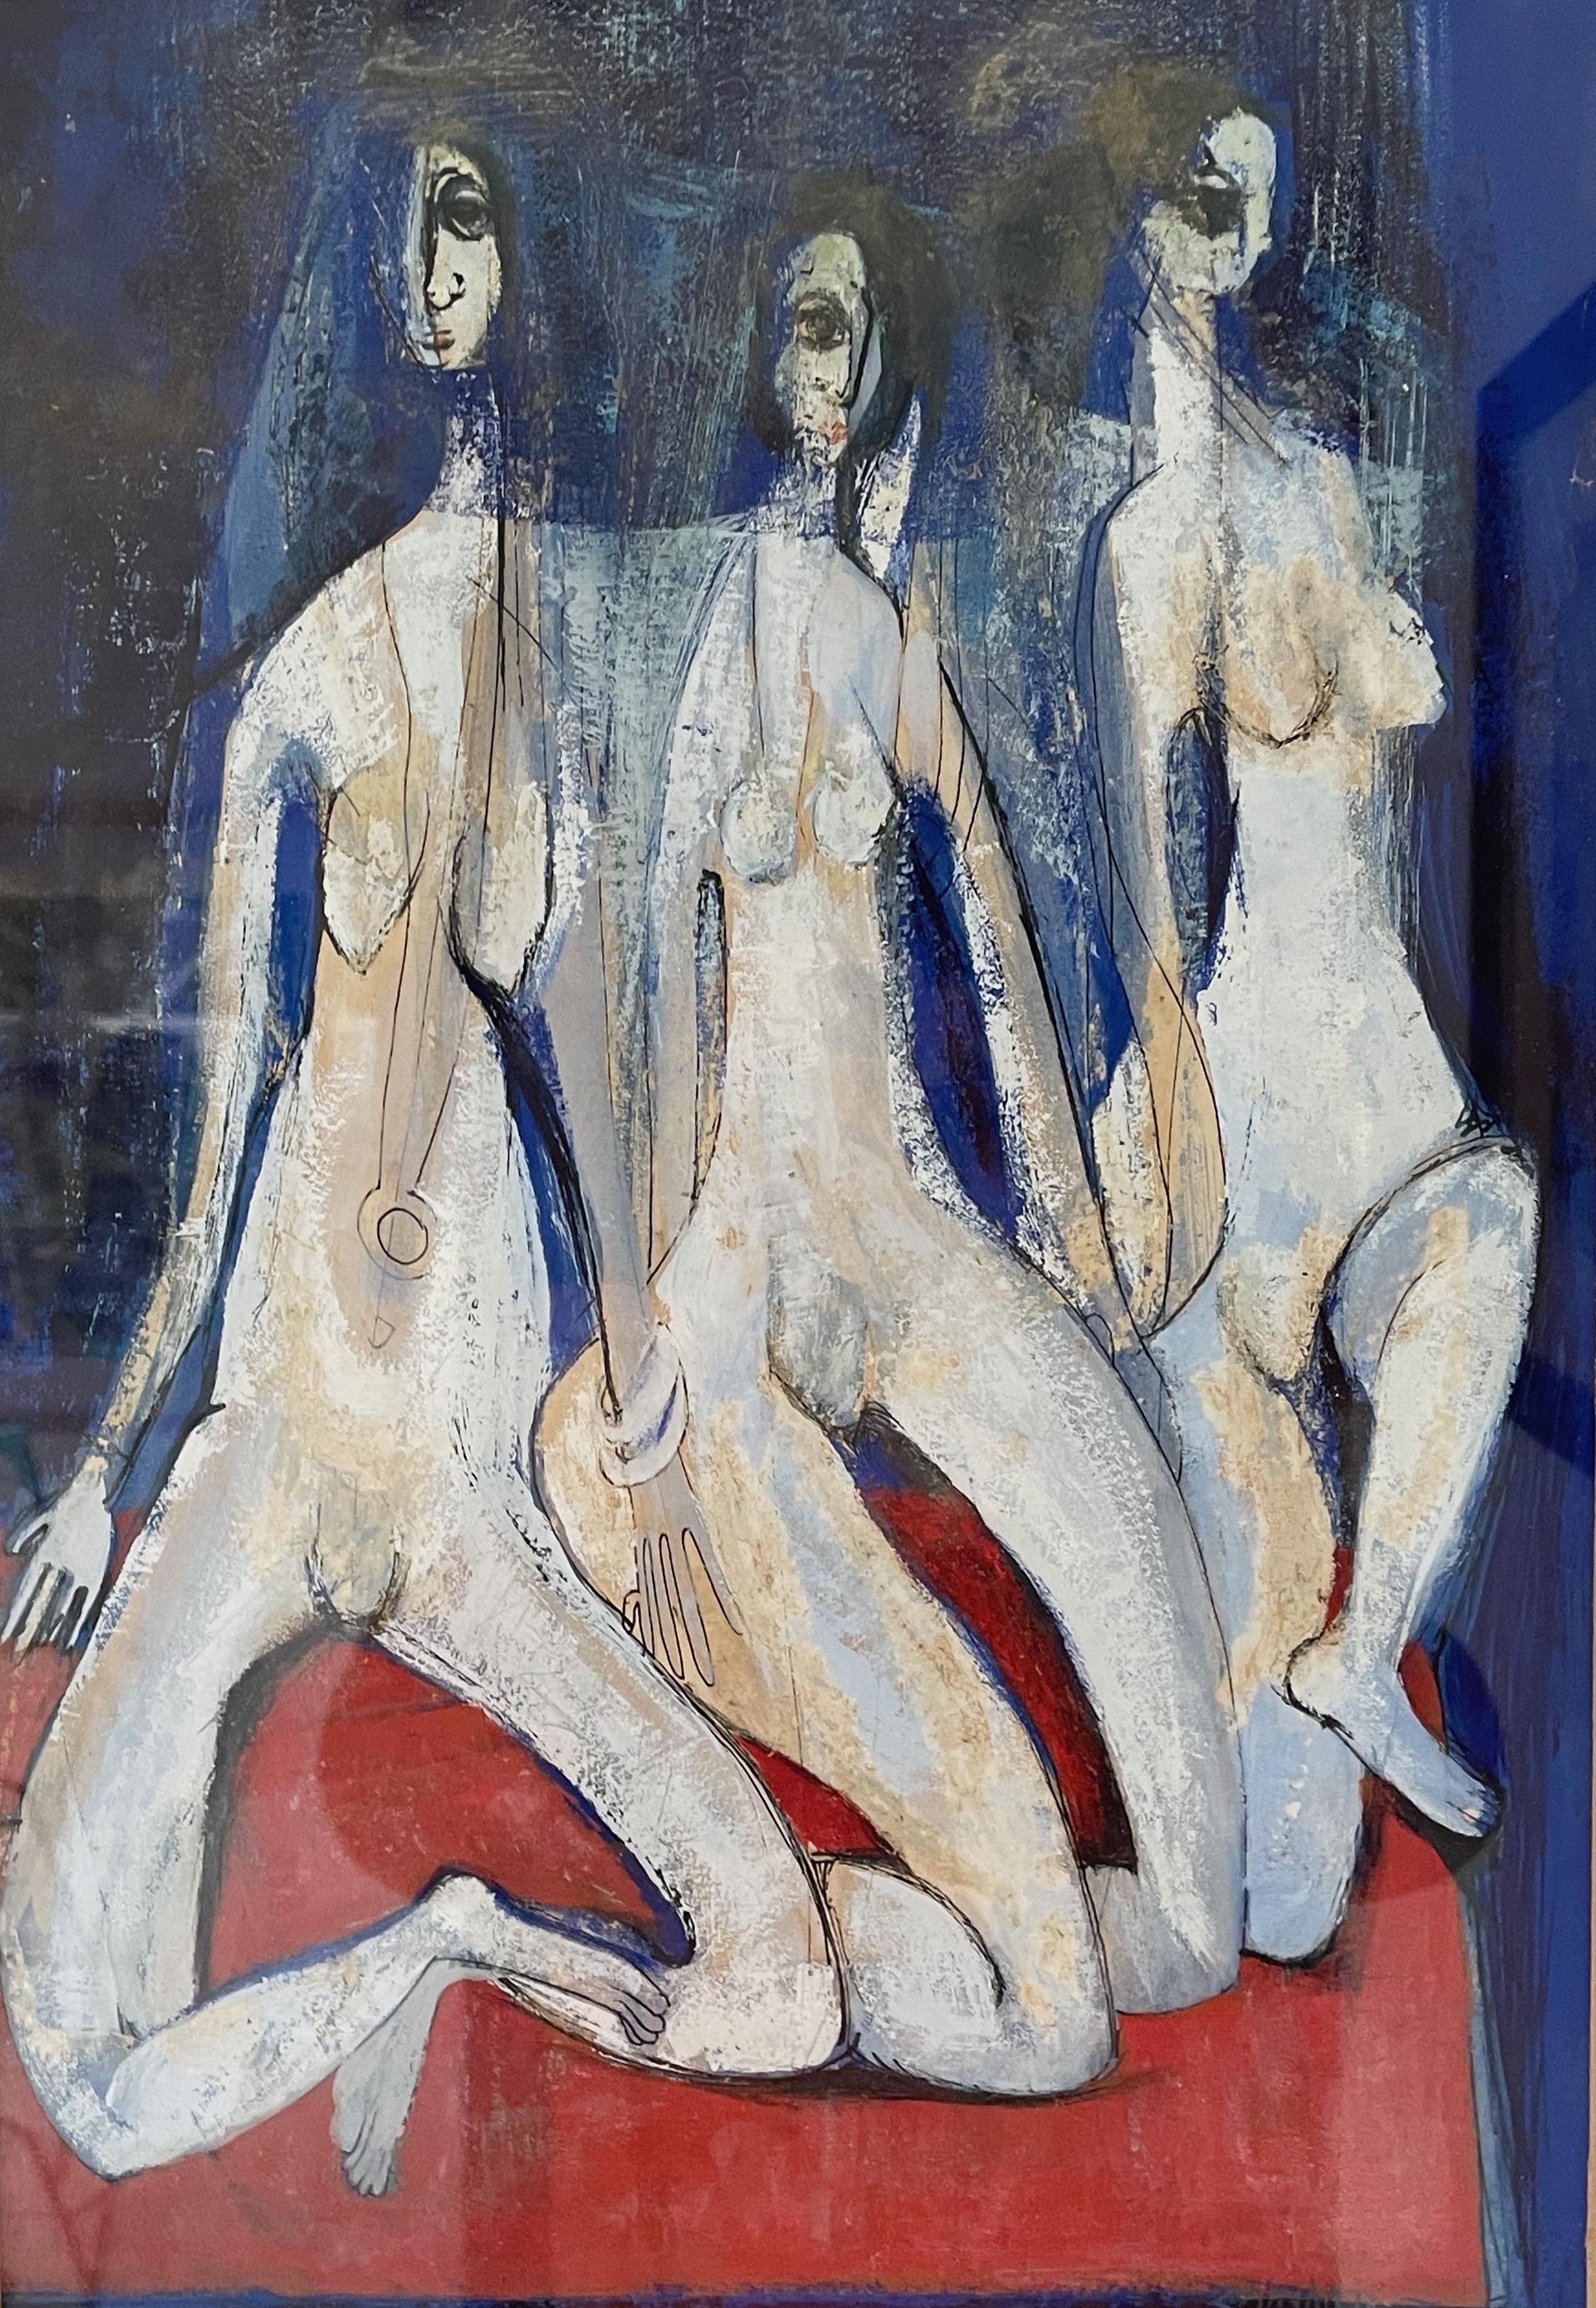 Zainab Reddy Figurative Painting - Composition With Figures. Figurative Gouache Painting